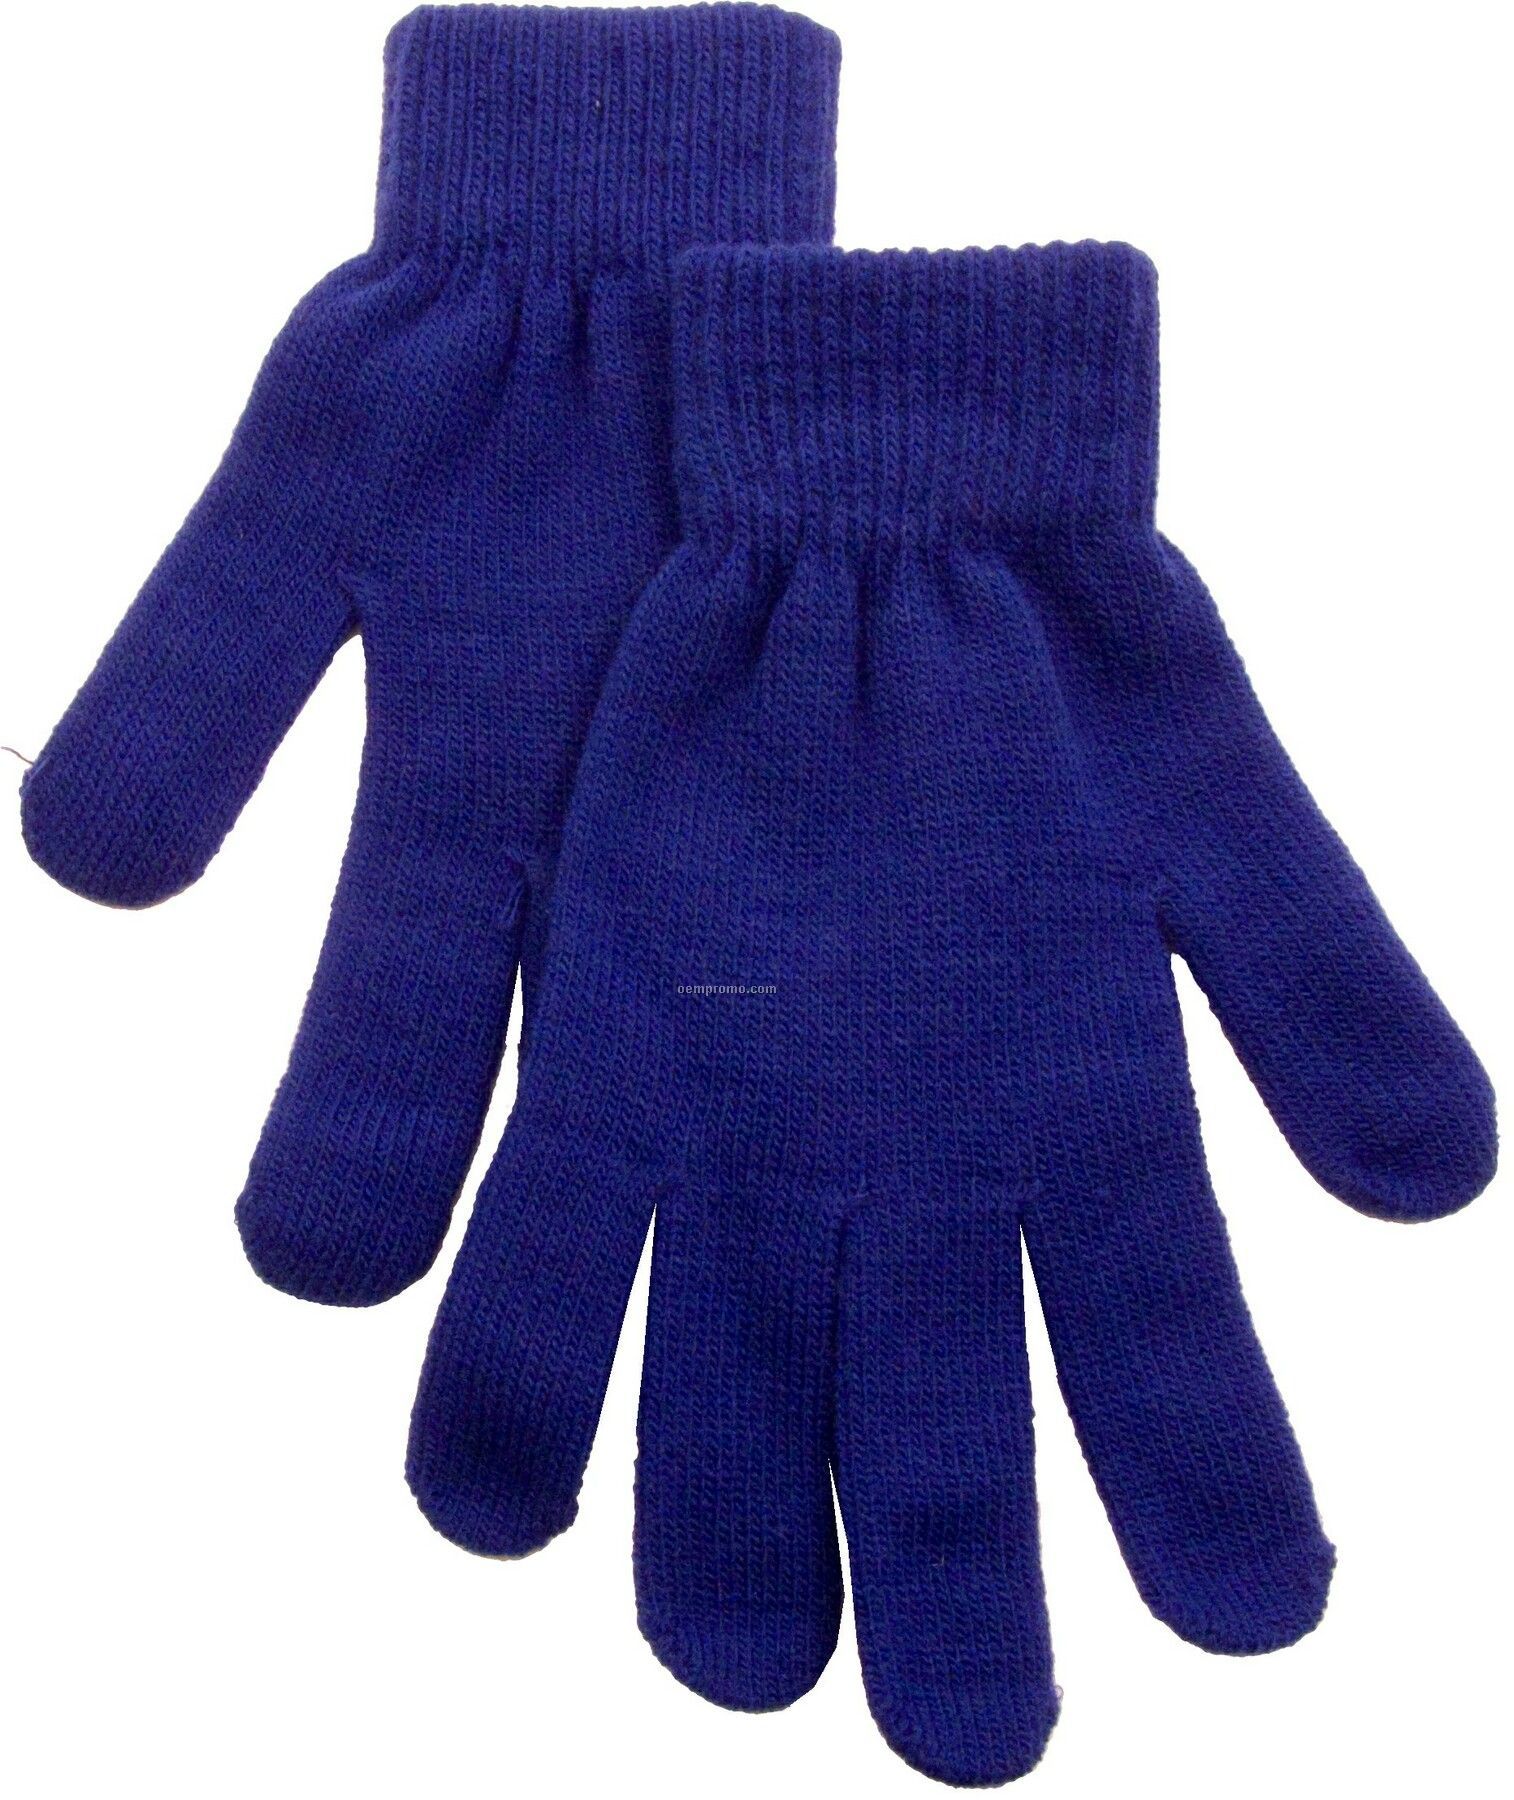 Acrylic Gloves (Overseas 6-7 Week Delivery)